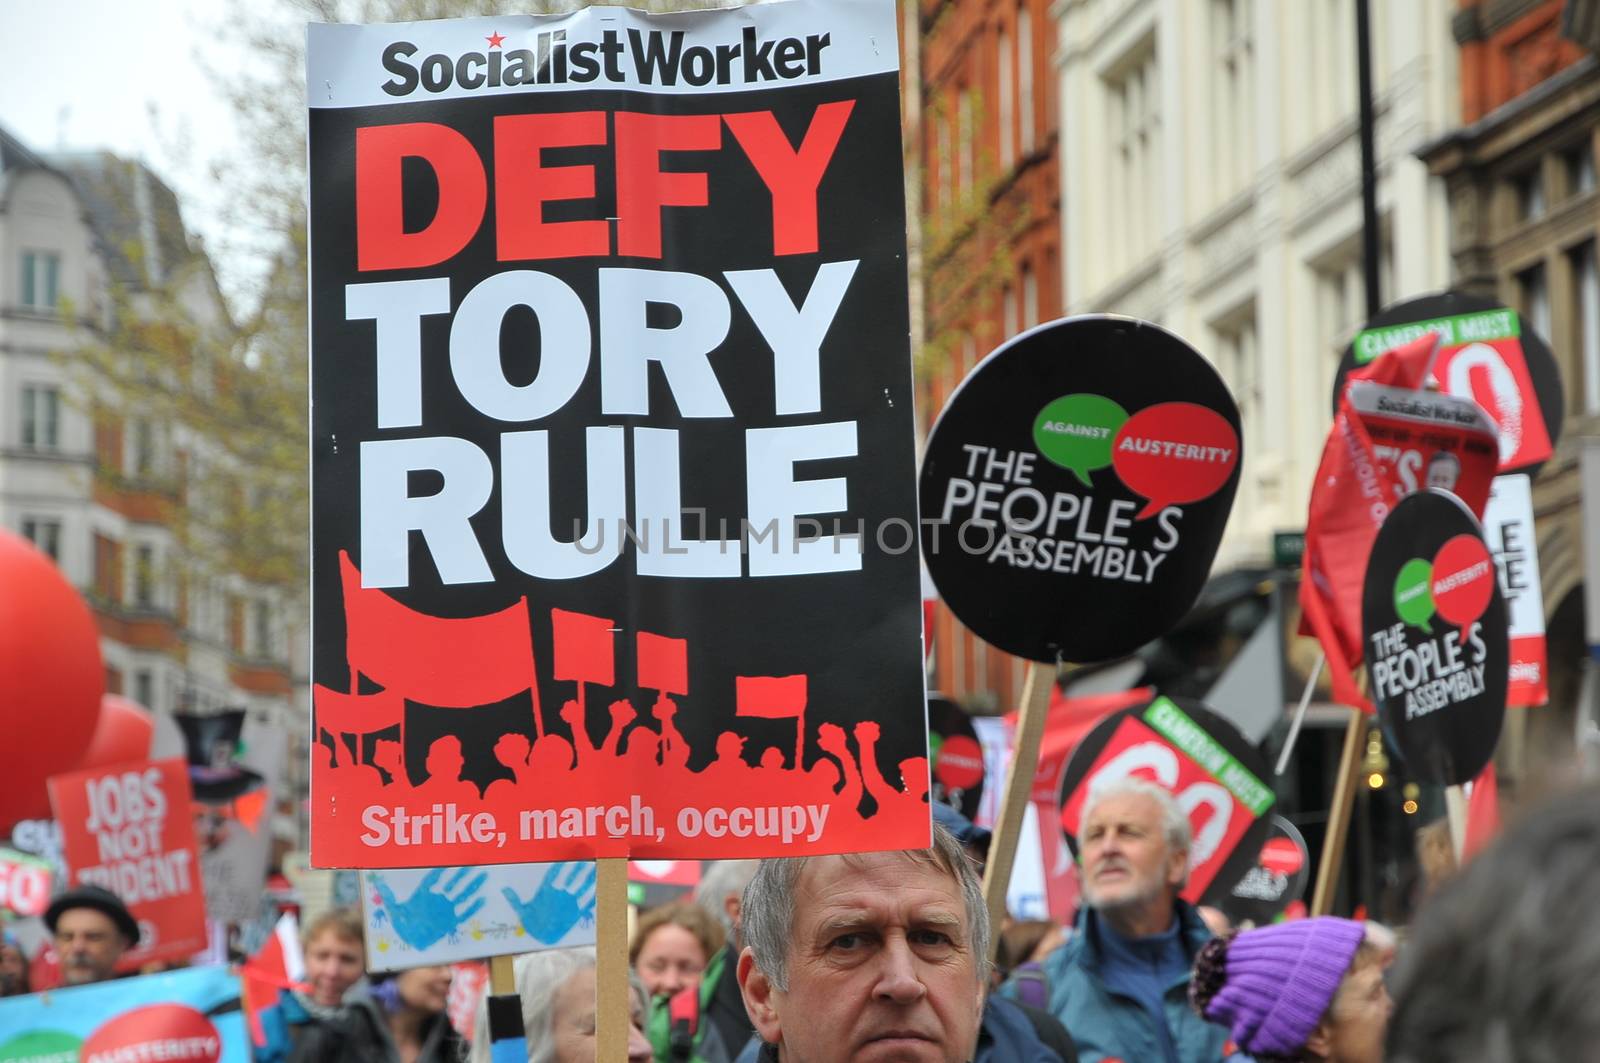 UNITED KINGDOM, London: A protester holds a sign reading 'Defy Tory Rule' as ten of thousands march and protest against the Tories government and demanded David Cameron's resignation in Trafalgar square in London on April 16, 2016. Protesters descended to London in hundreds of coaches from all over the UK to take part in this anti-austerity protest.